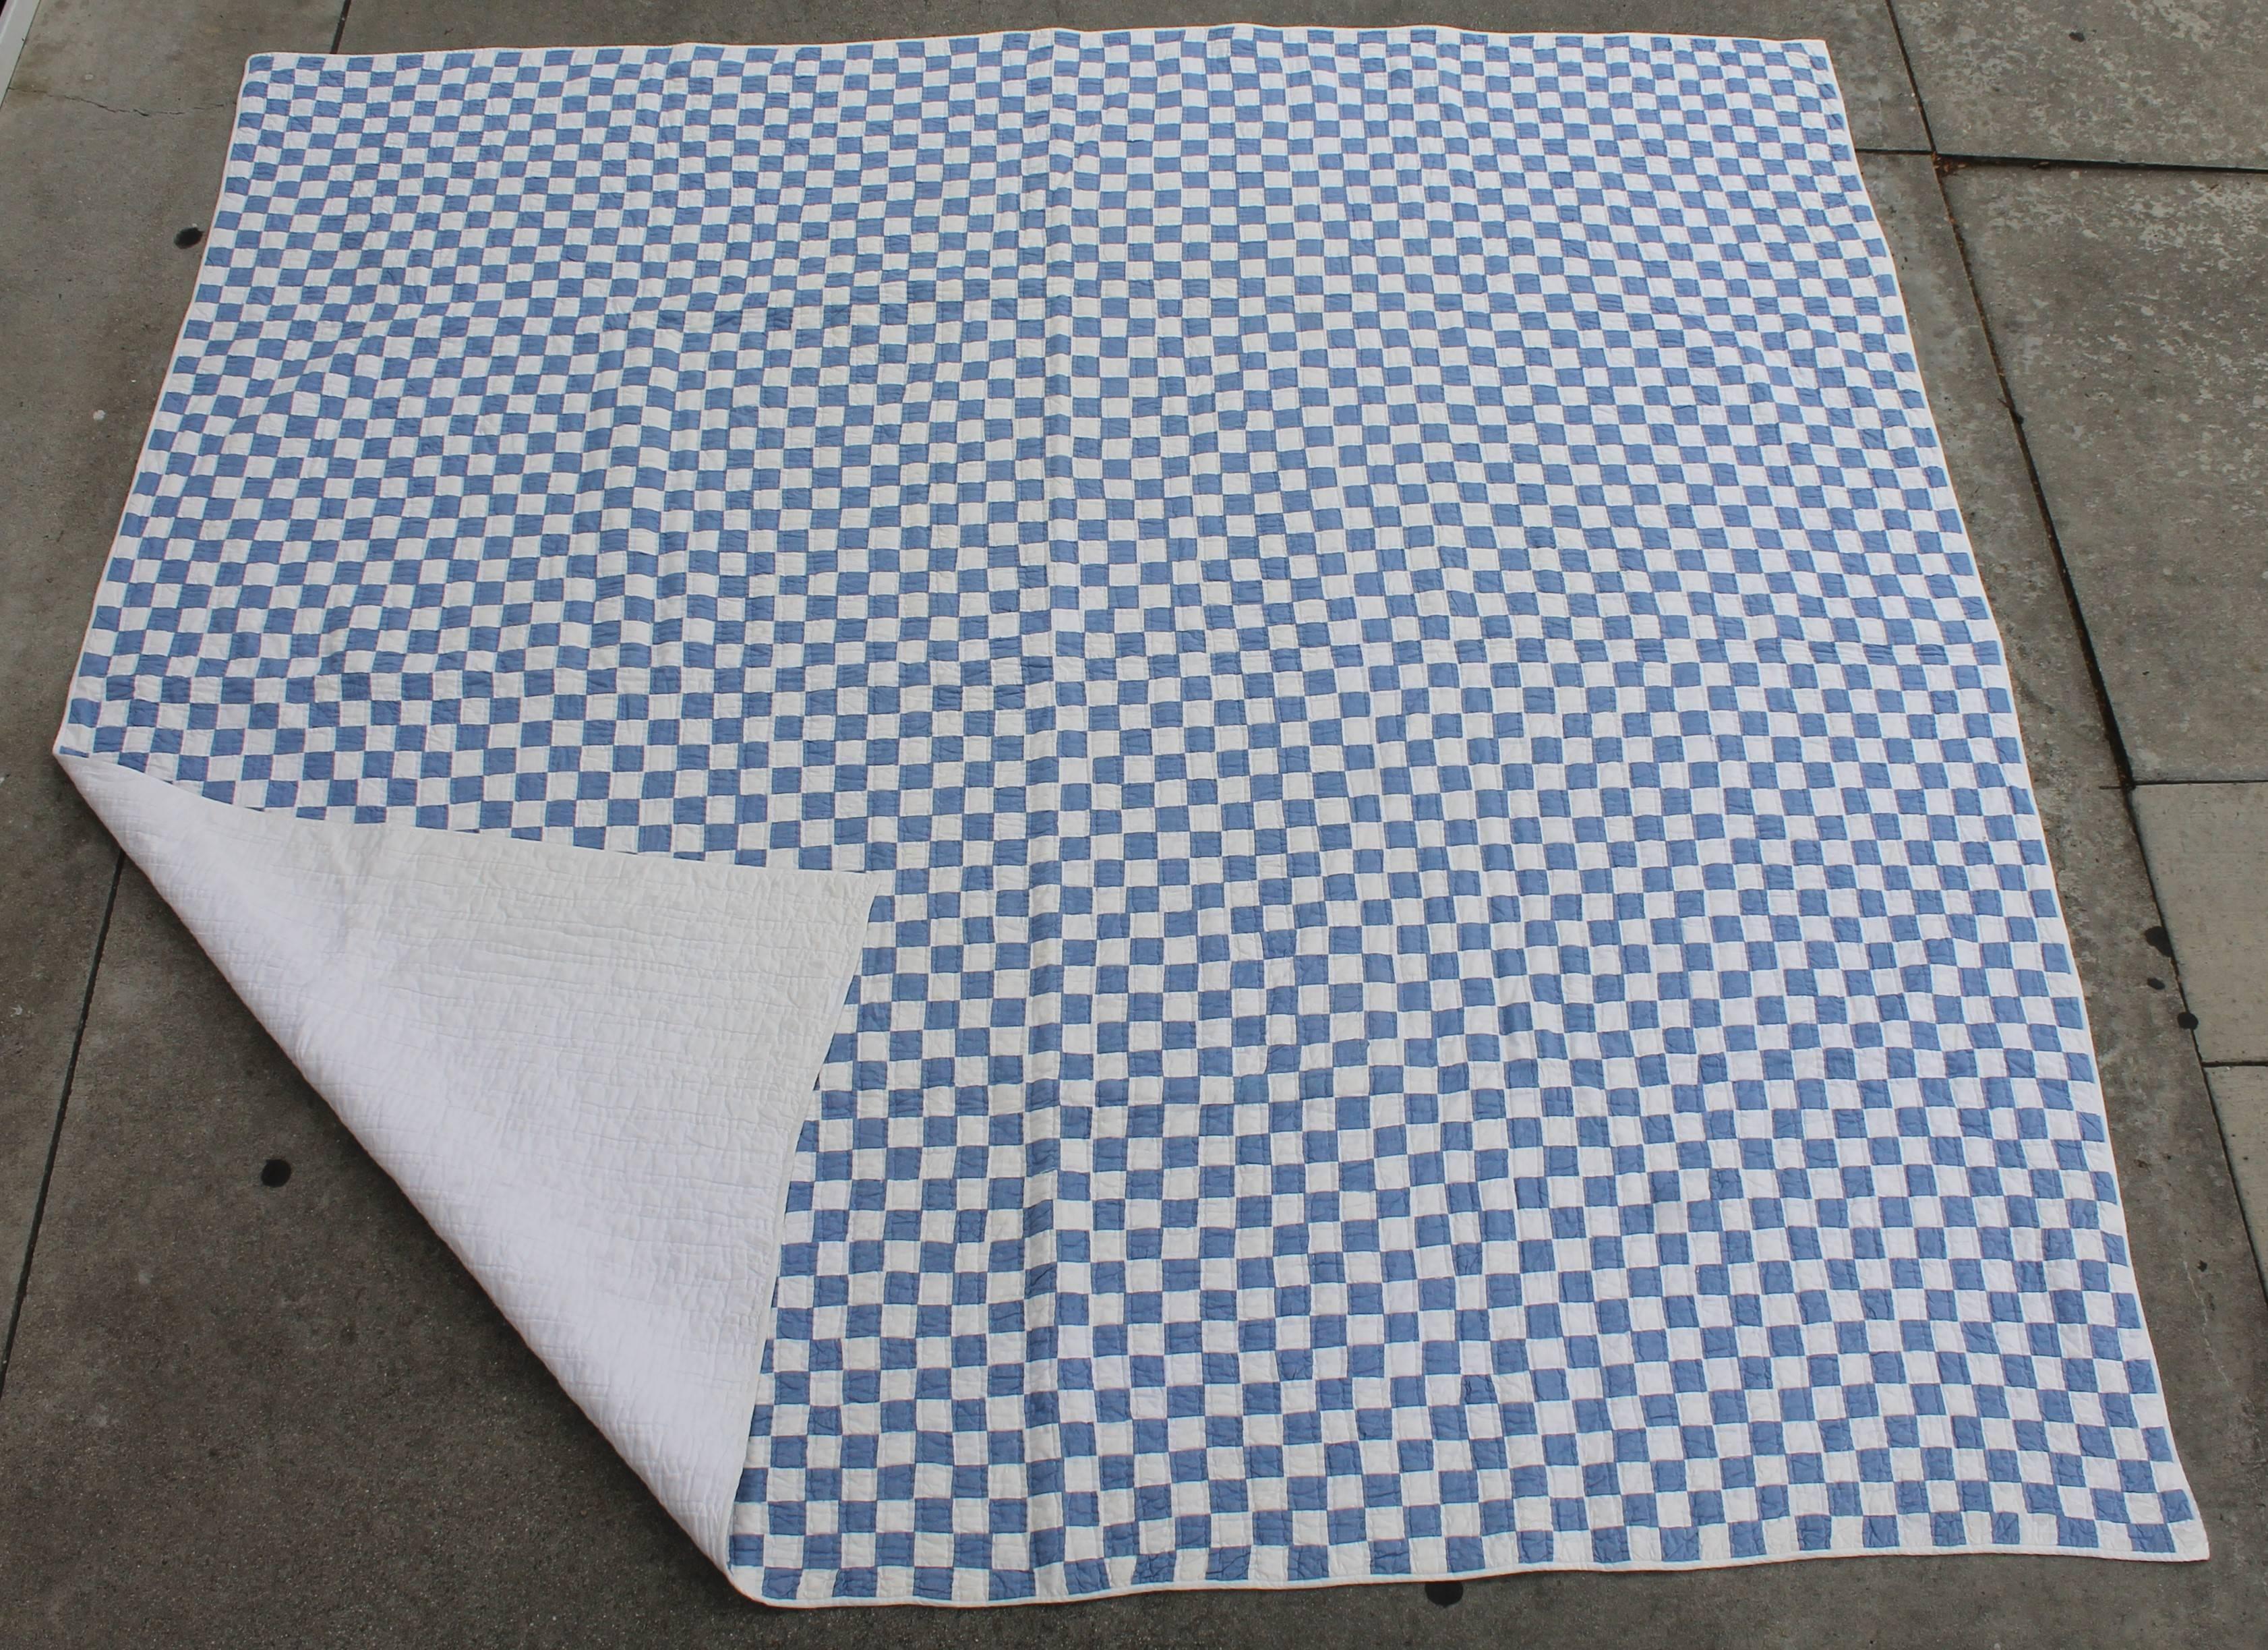 This large quilt in blue and white small pieces is in great condition and nicely pieced. This quilt would fit a queen or king bed.